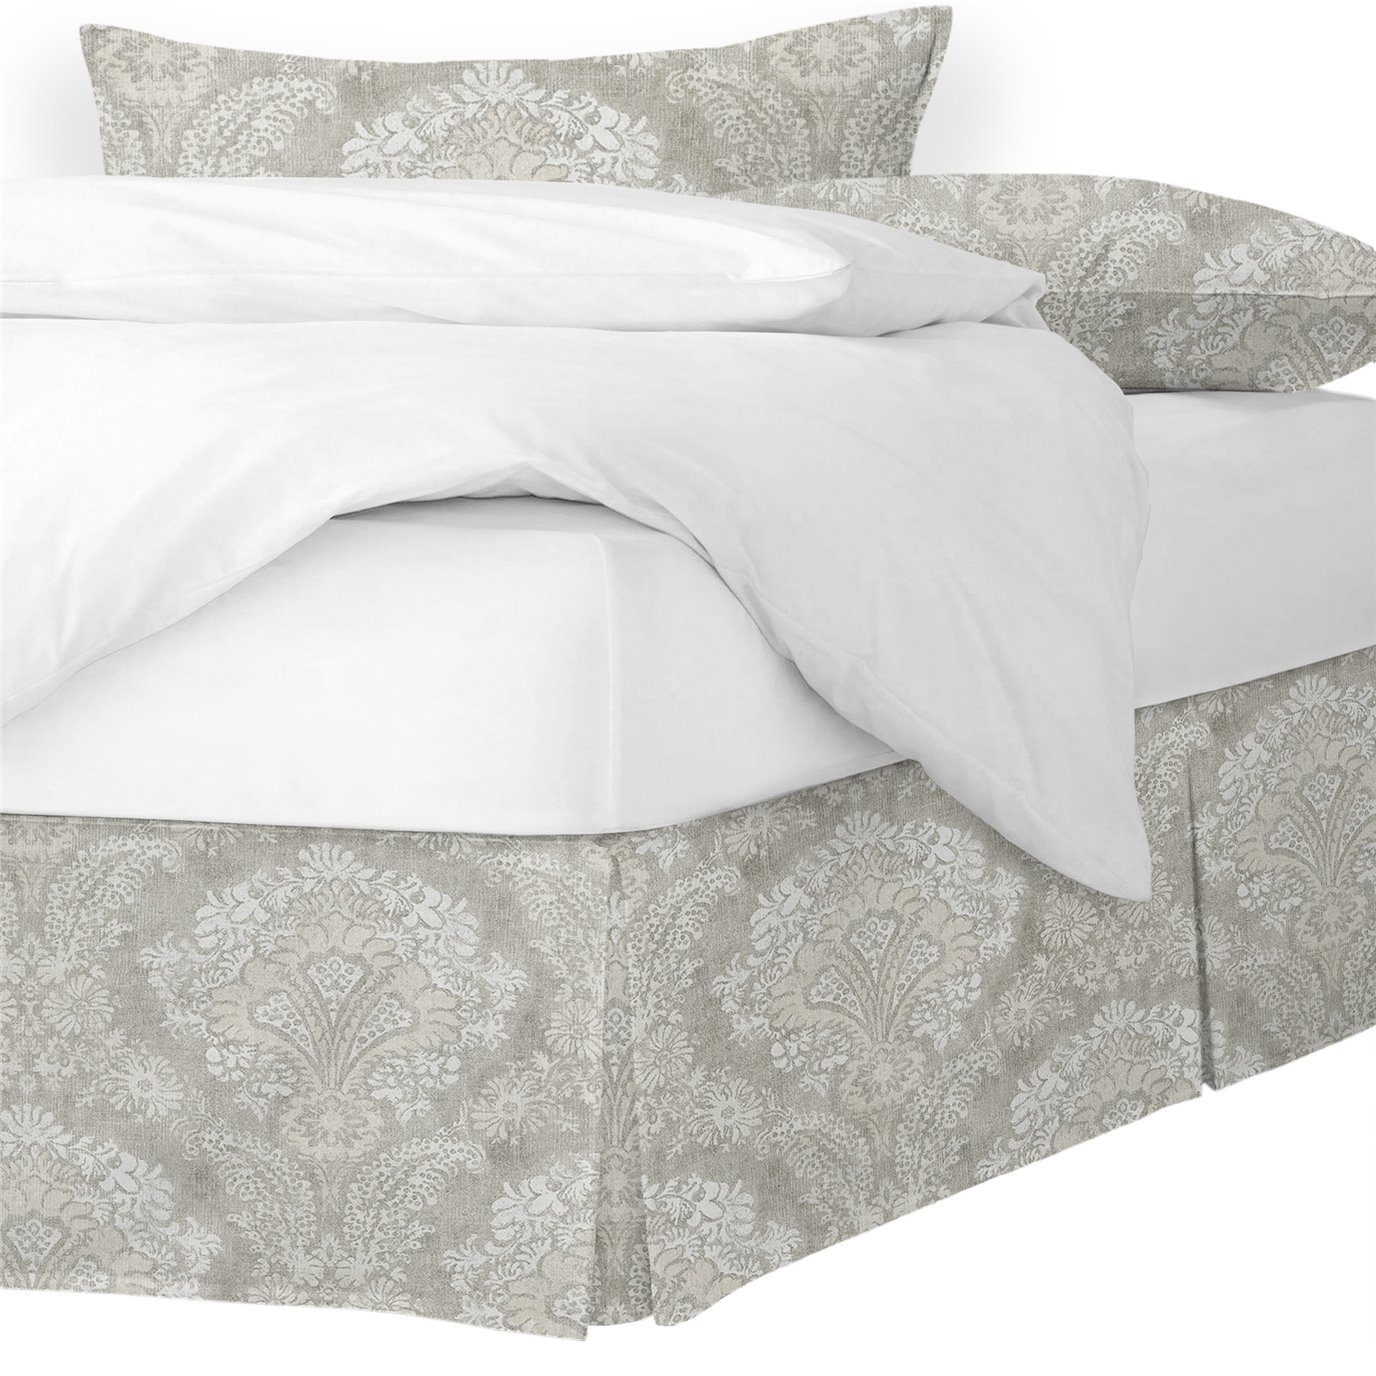 Ophelia Stone King Bed Skirt 18" drop